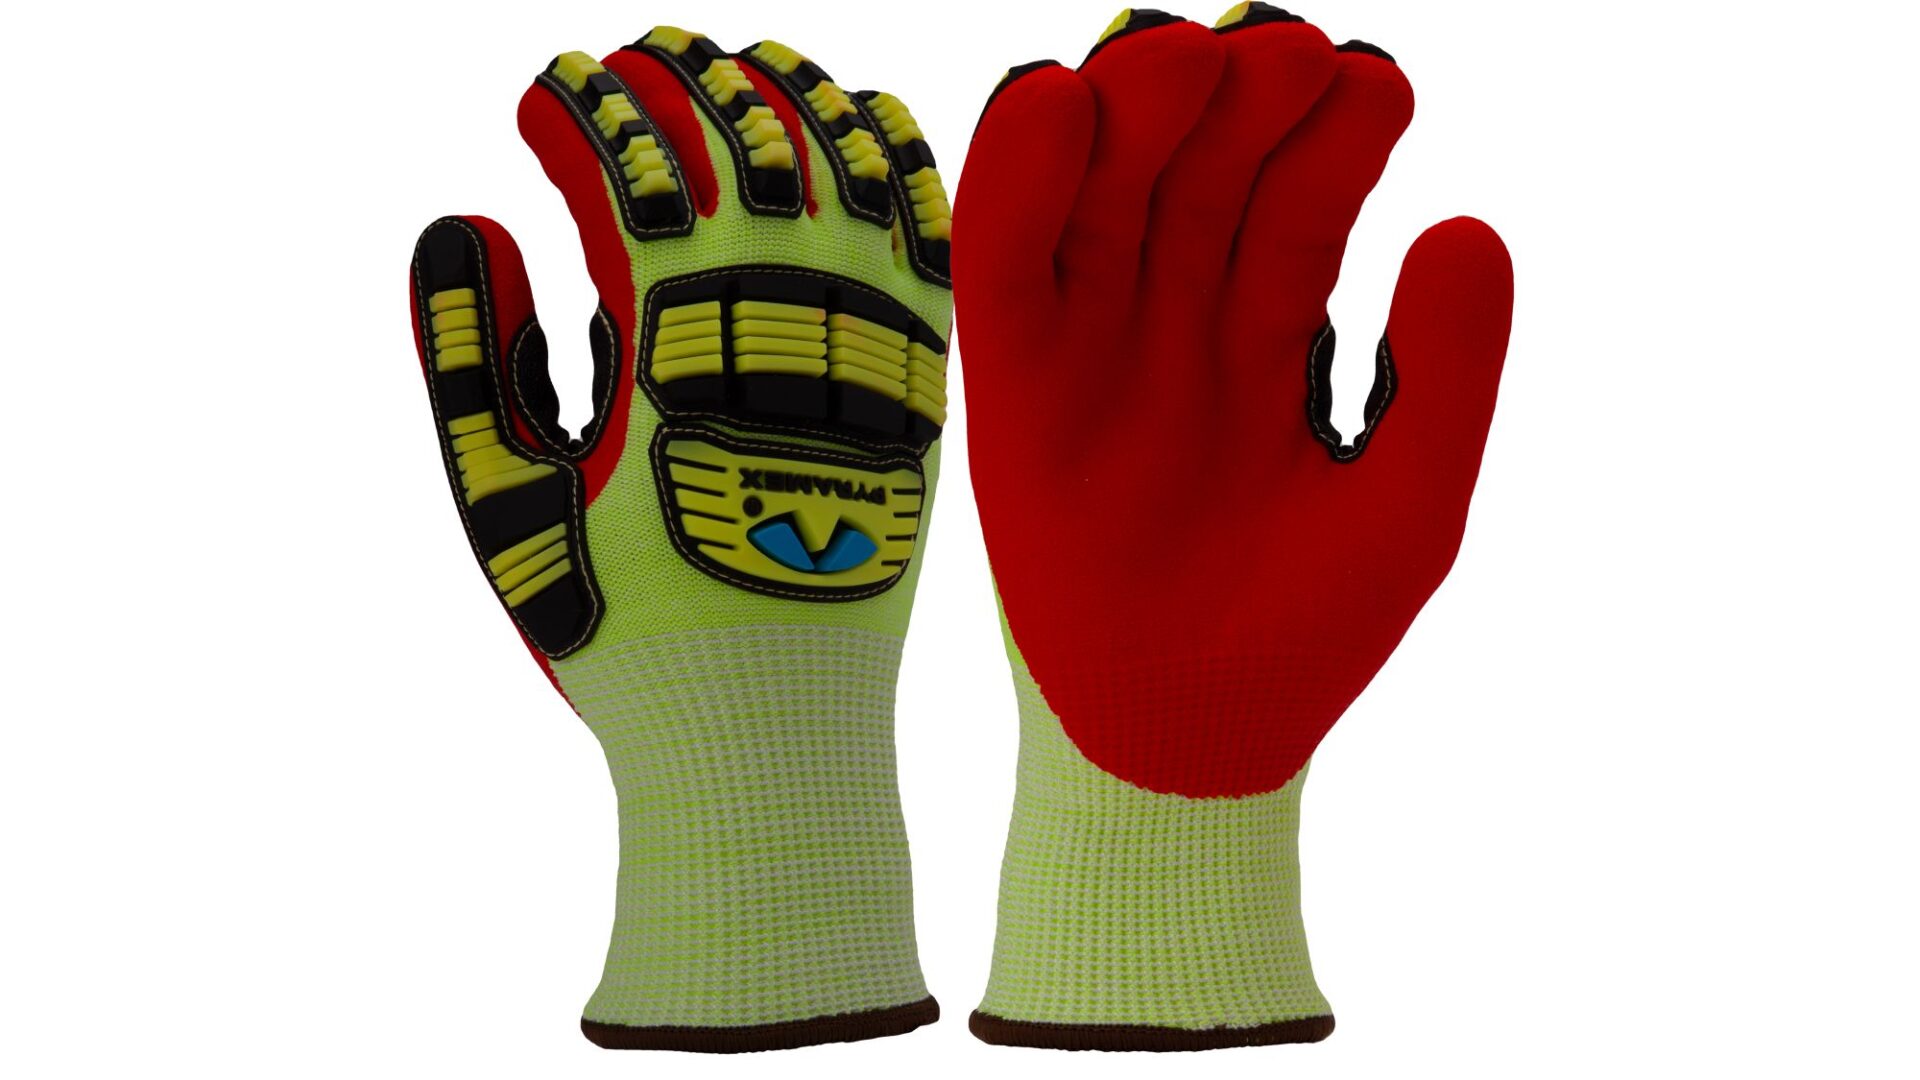 Lemon Yellow and Red Gloves With Yellow and Black Details